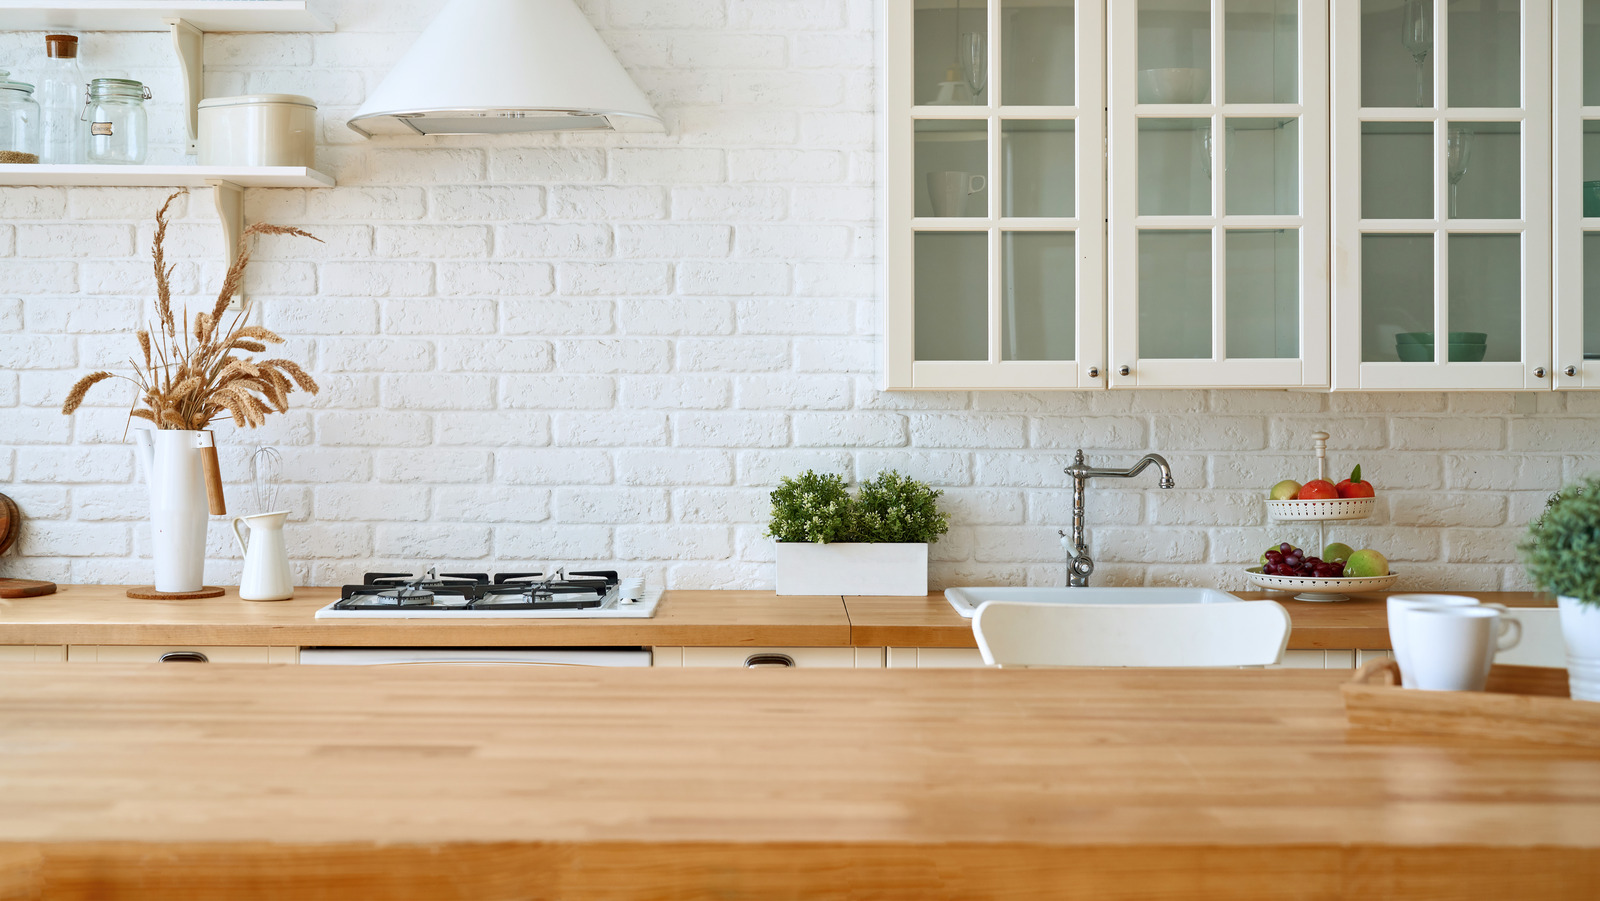 https://www.housedigest.com/img/gallery/butcher-block-countertop-what-to-know-before-you-buy/l-intro-1635518512.jpg